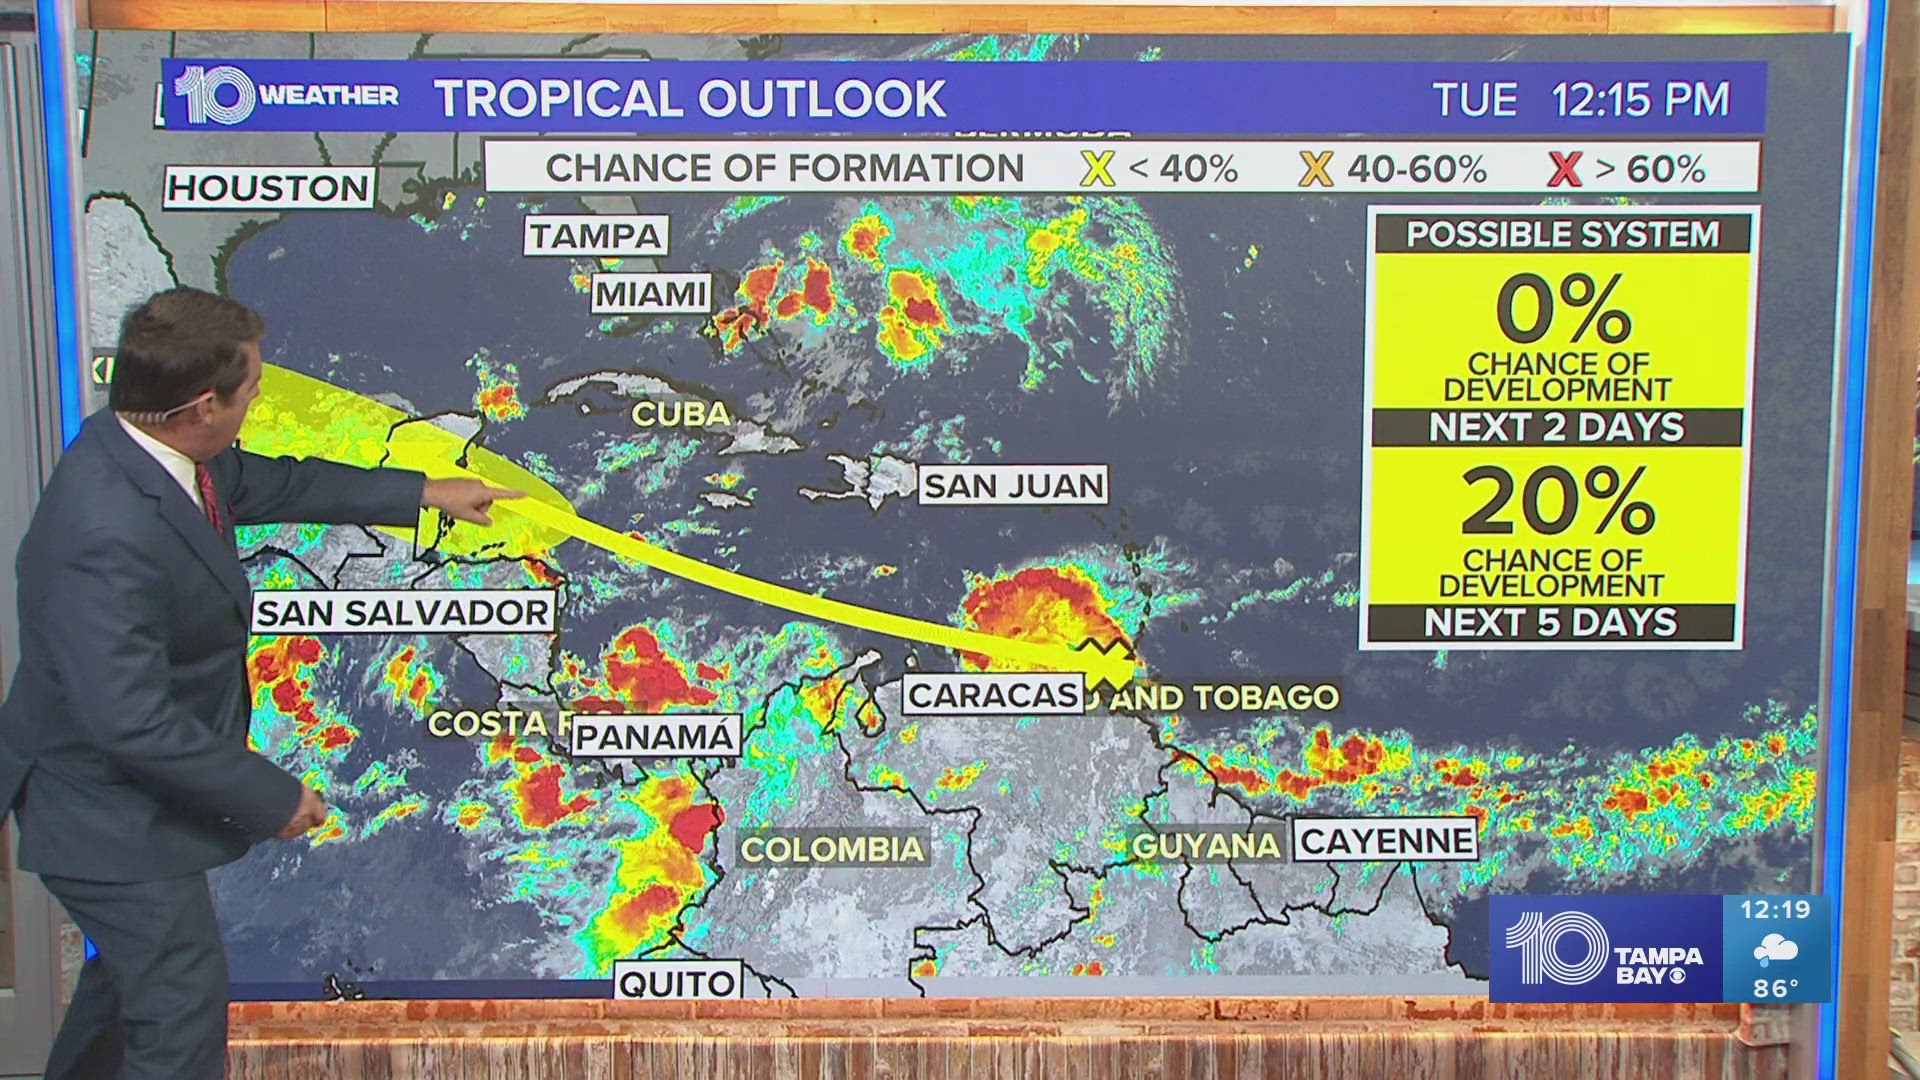 A new system of interest near the Caribbean has a 20% chance of development, but Saharan sands may dry the storm up.